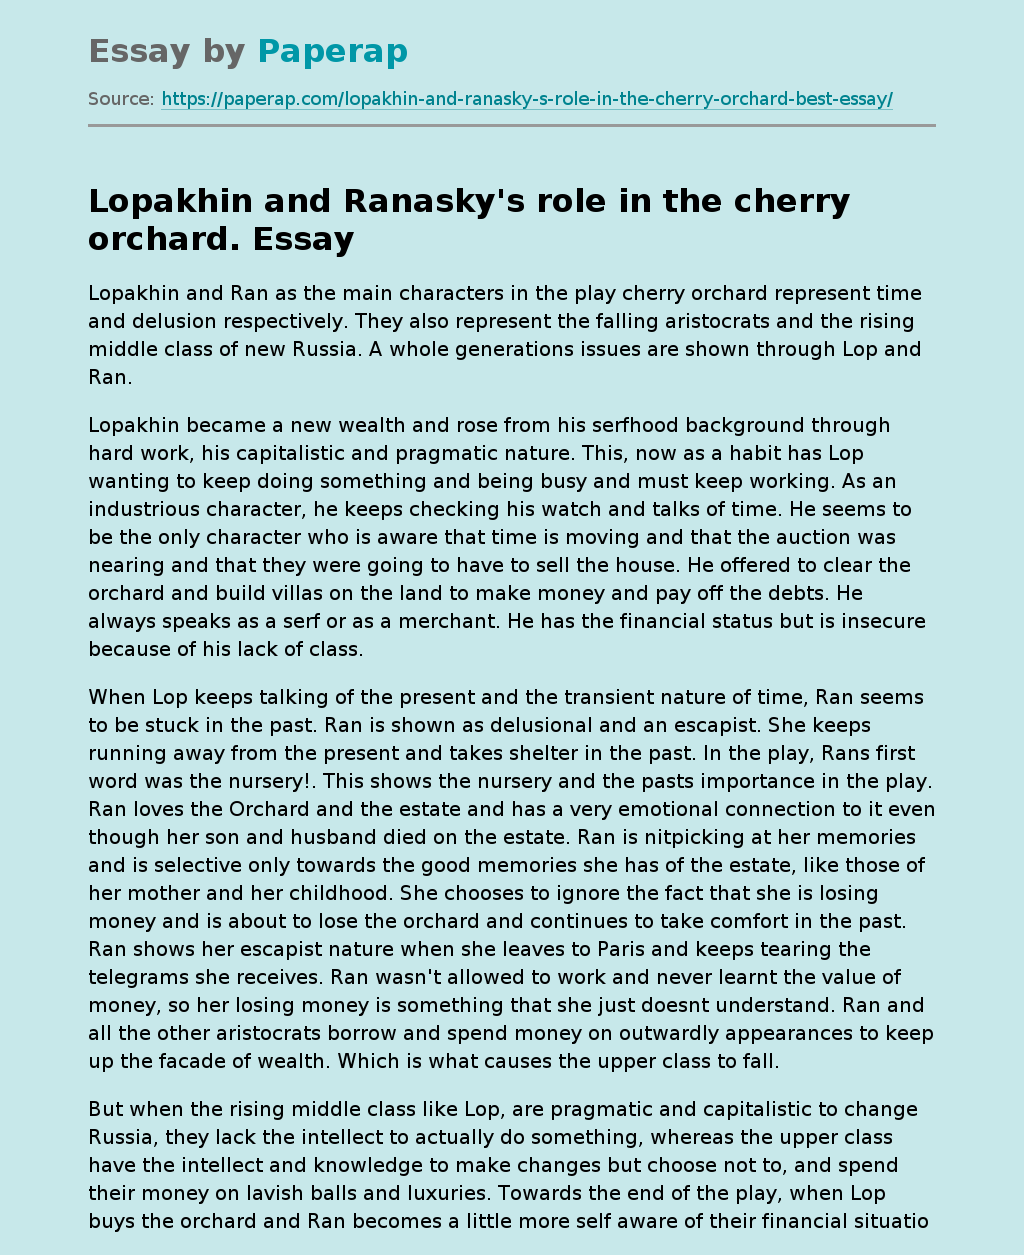 Lopakhin and Ranasky's role in the cherry orchard.